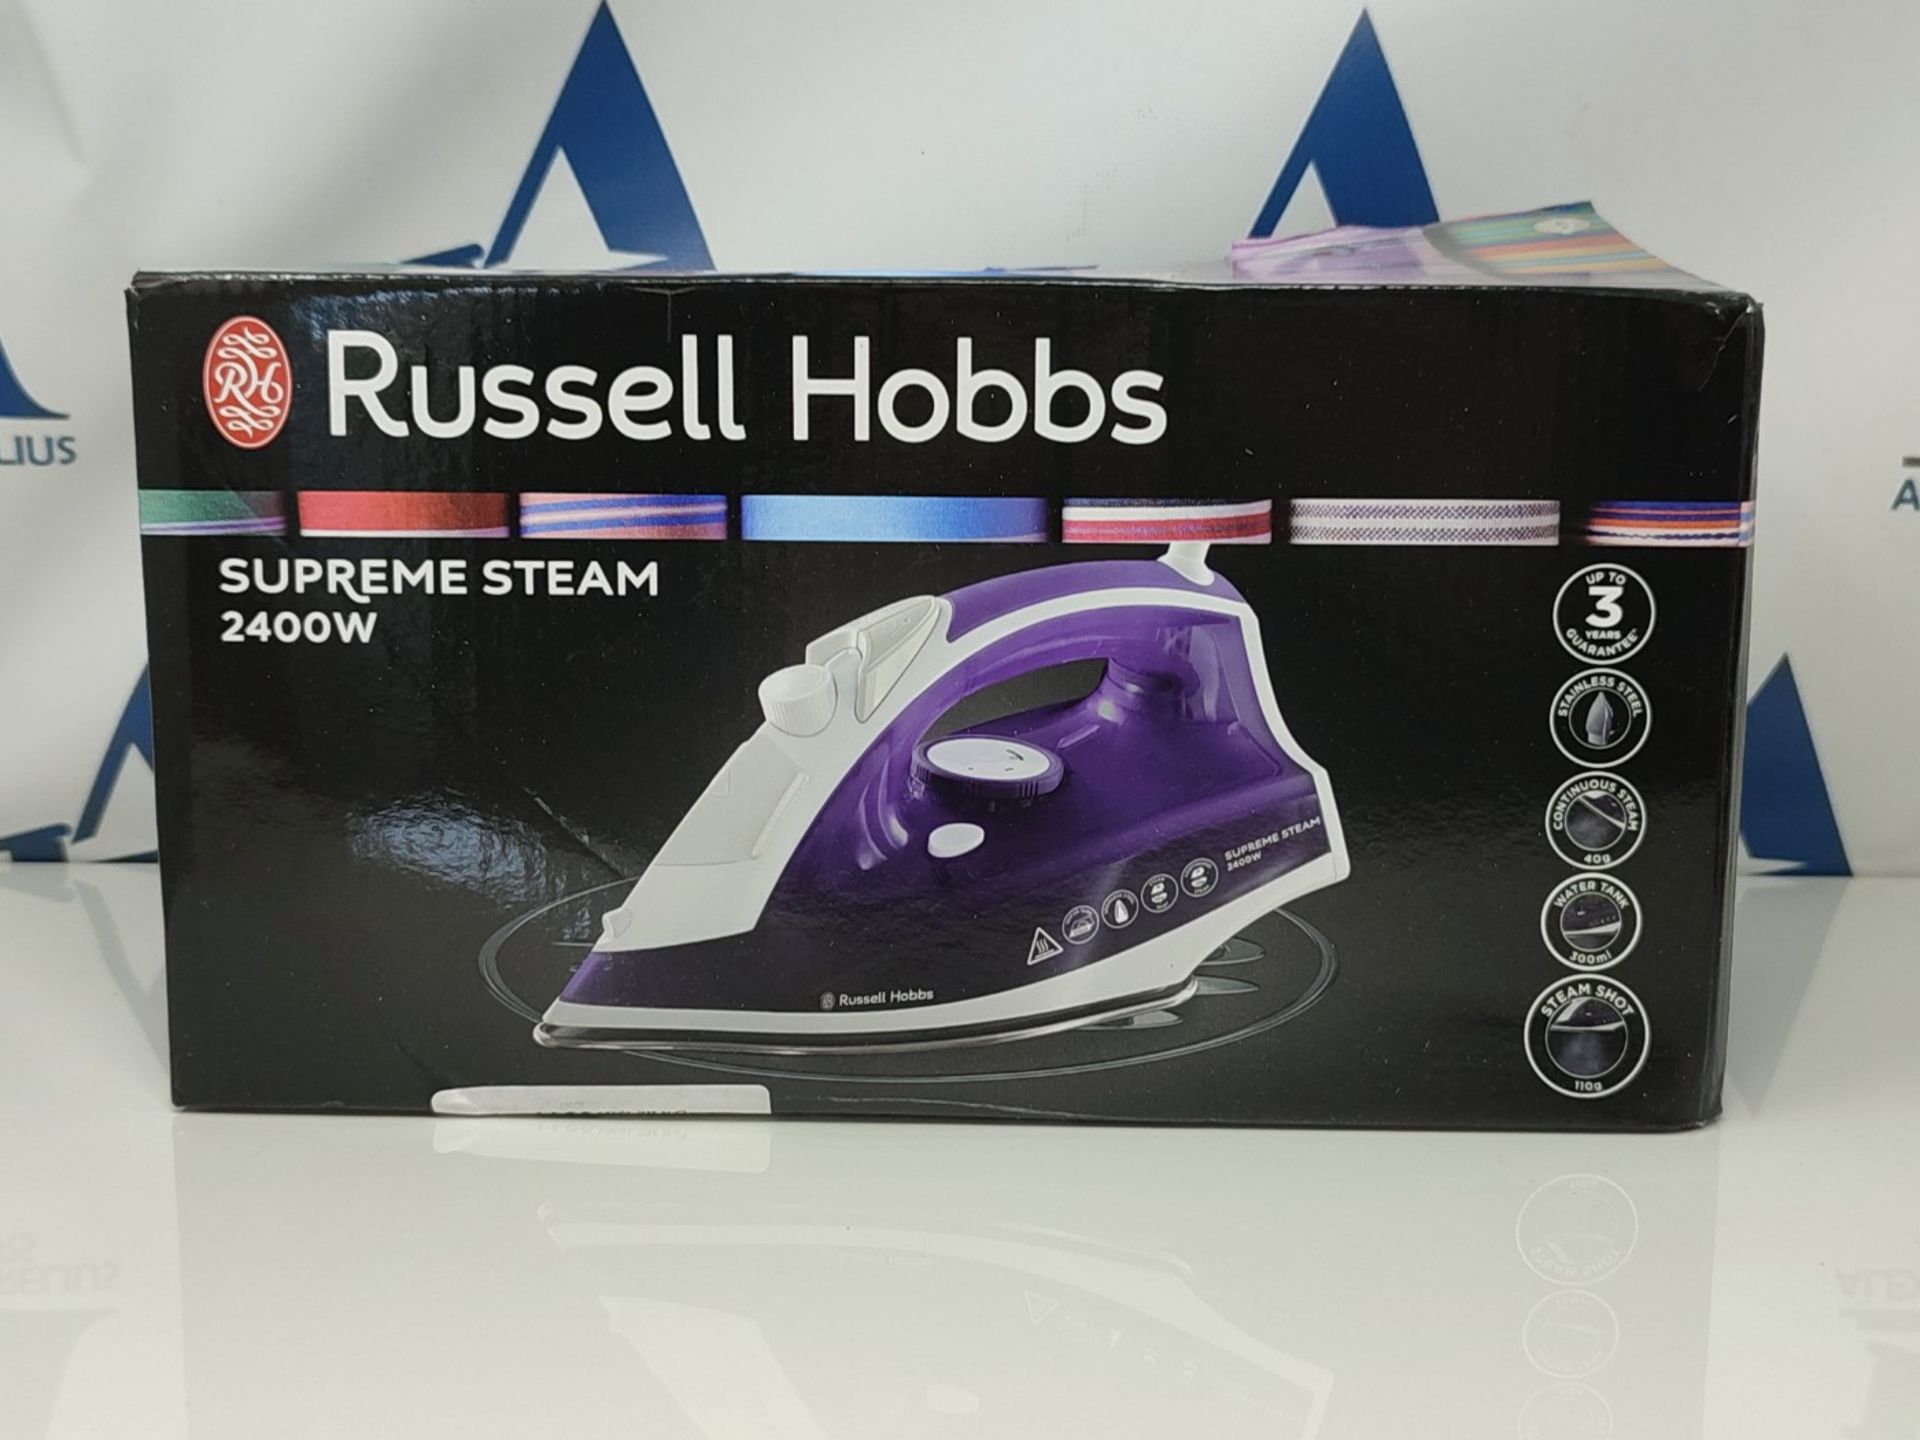 Russell Hobbs Supreme Steam Traditional Iron 23060, 2400 W, Purple/White - Image 2 of 3